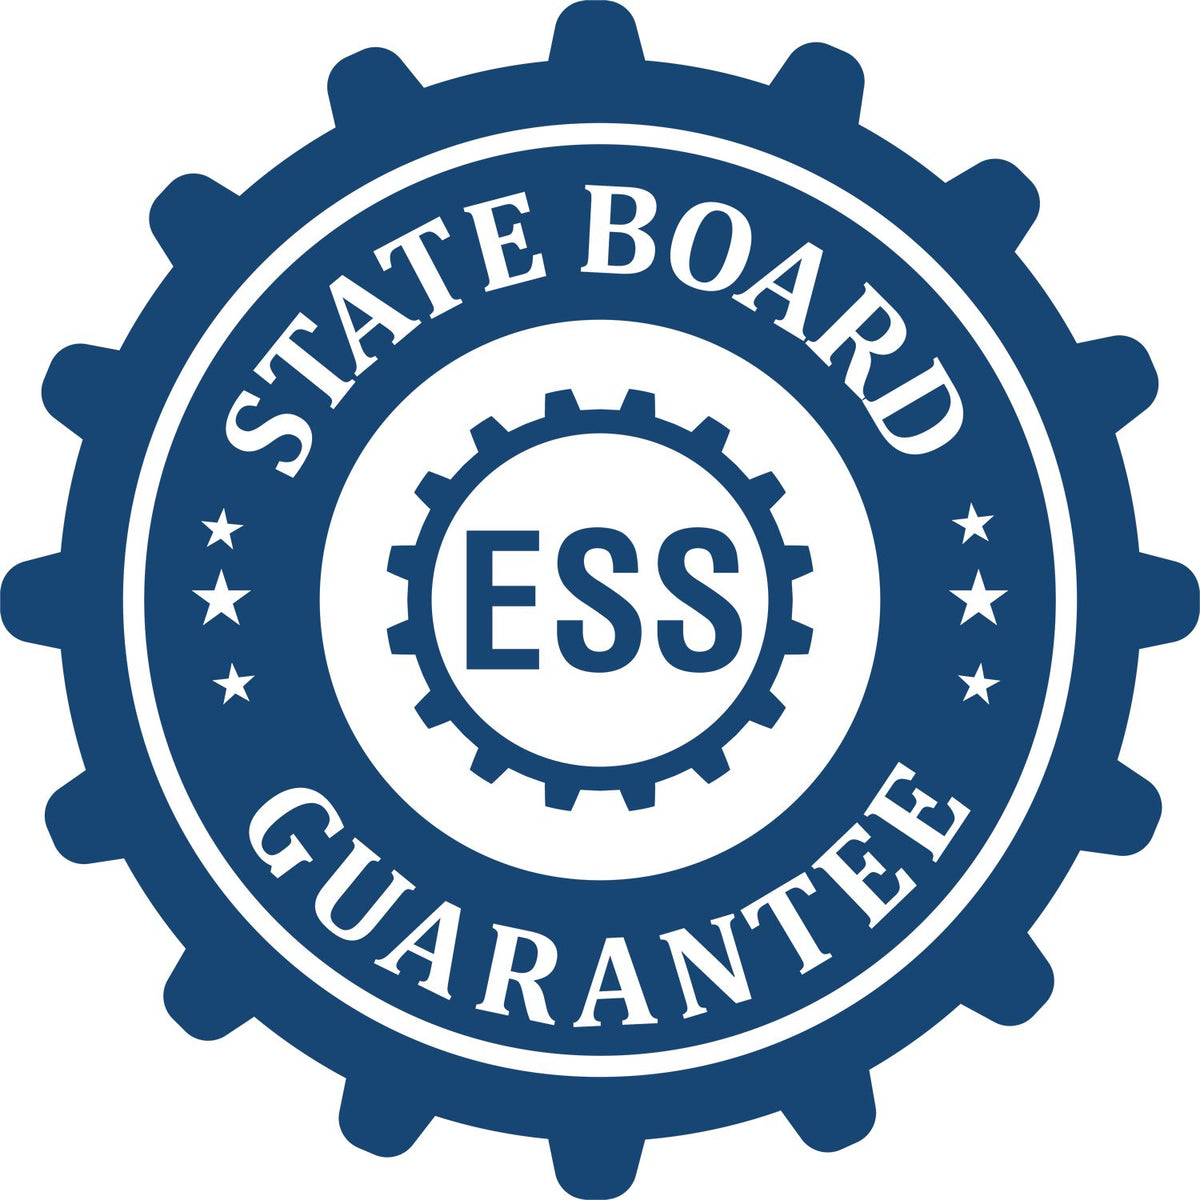 An emblem in a gear shape illustrating a state board guarantee for the Digital Texas PE Stamp and Electronic Seal for Texas Engineer product.